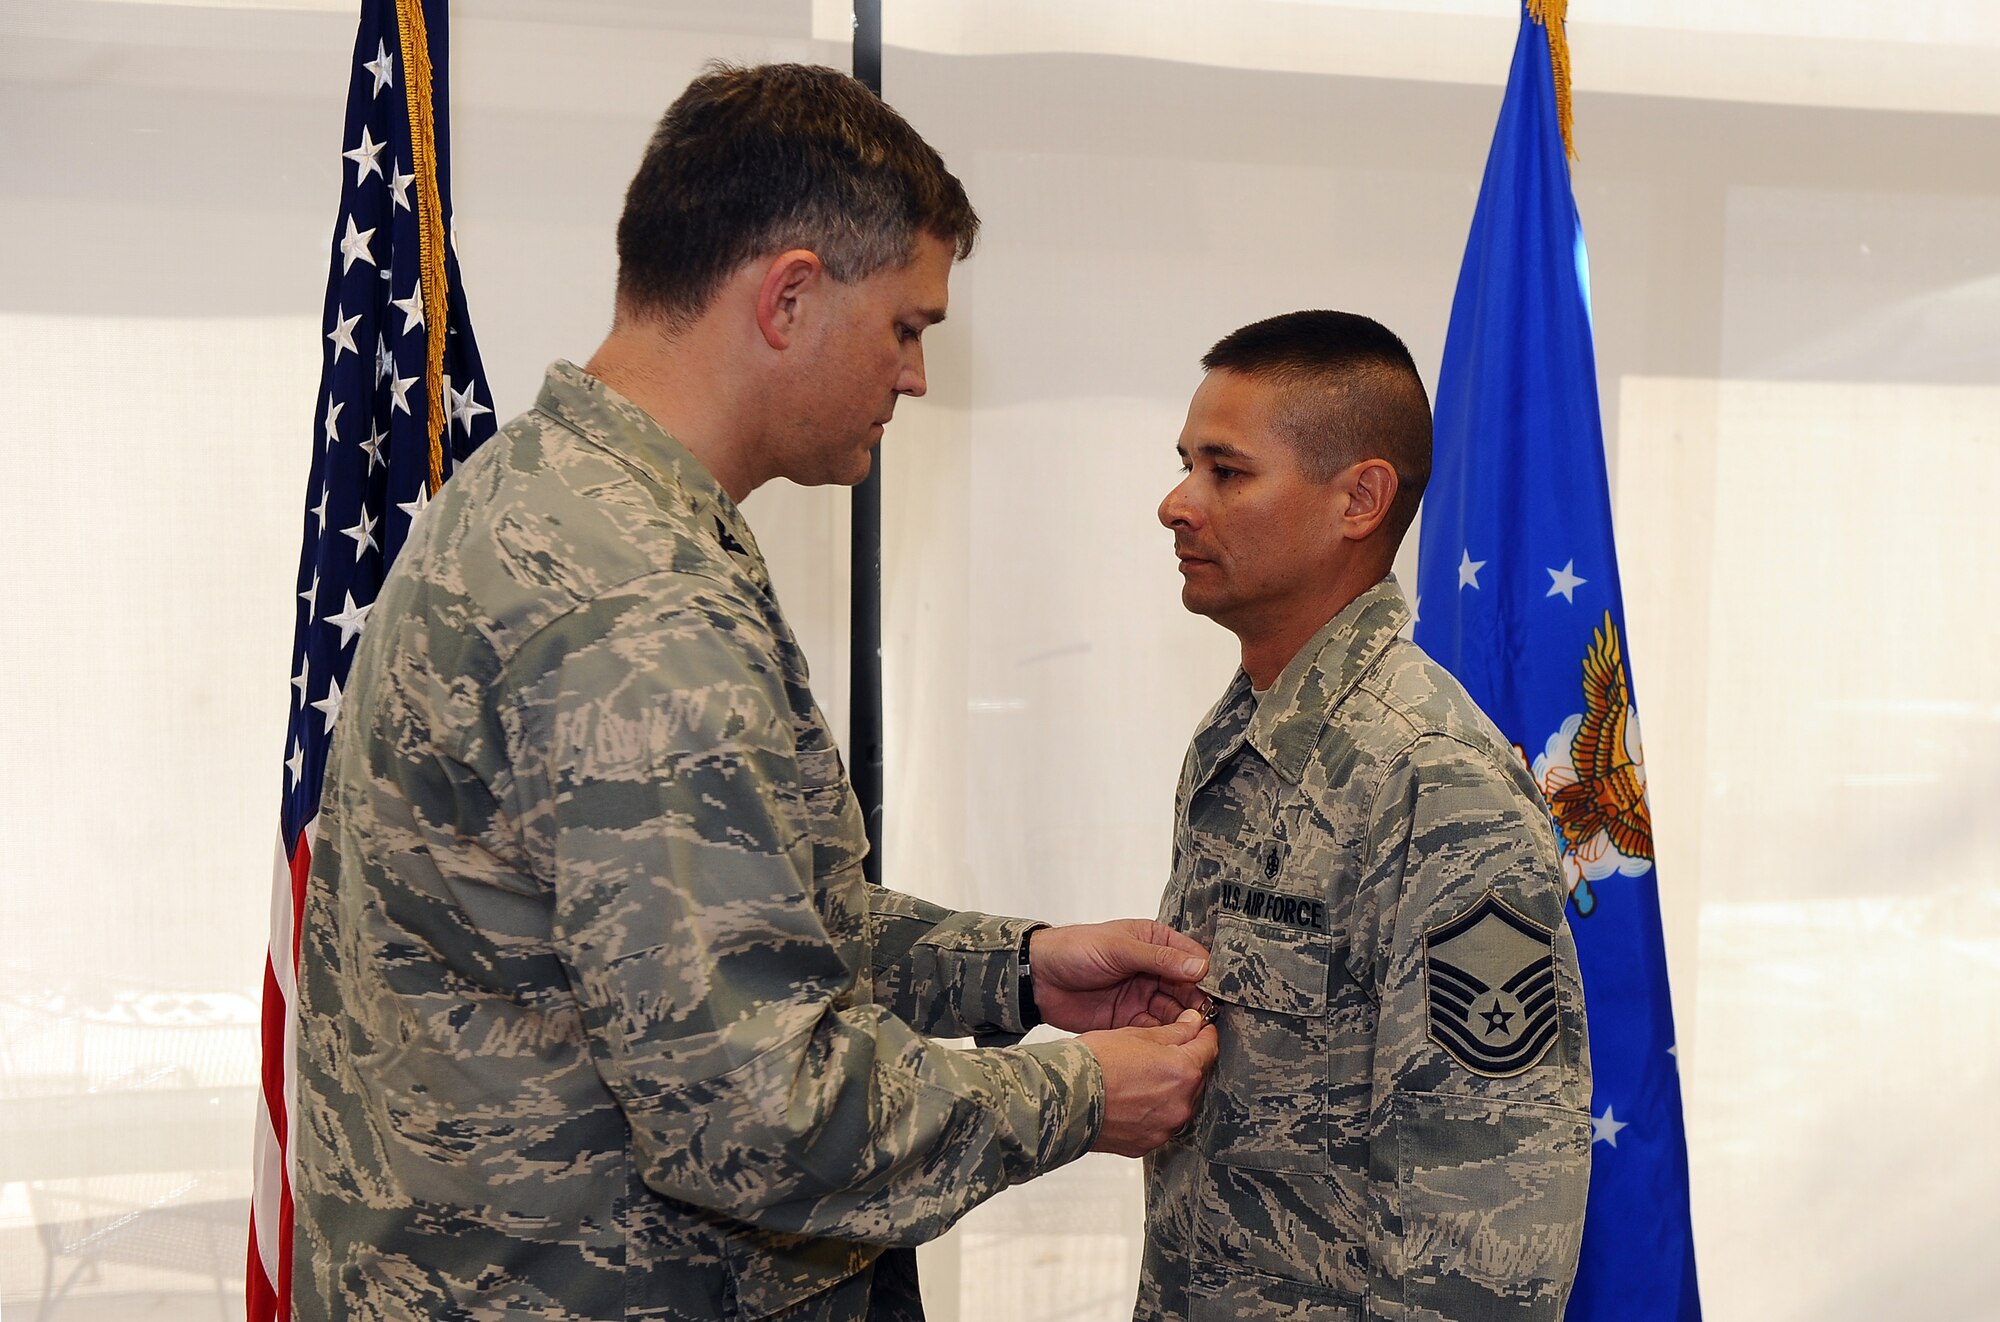 U.S. Air Force Col. Kevin D. Dixon, 55th Wing vice commander, pins the Bronze Star medal onto U.S. Air Force Master Sgt. Christopher Banks at a ceremony in the 55th Medical Group's dining facility, Offutt Air Force Base, Neb., Sept. 27. Banks earned the medal for his heroic acts performed under extreme real world conditions in Afghanistan. (U.S. Air Force photo by Josh Plueger/Released).